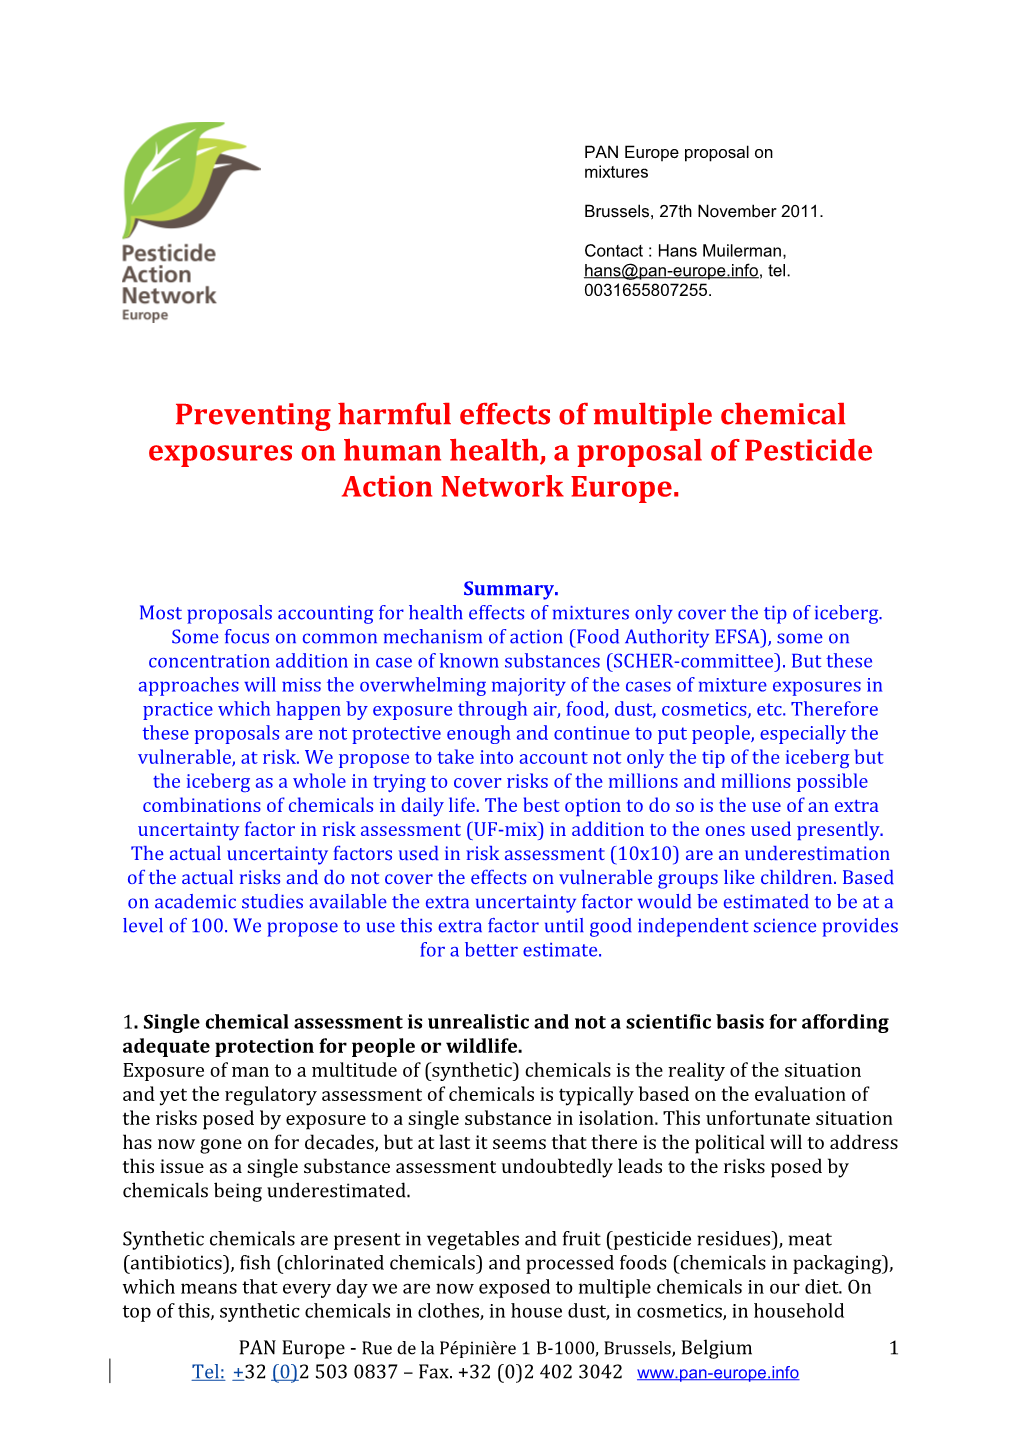 Preventing Harmful Effects of Multiple Chemical Exposures on Human Health, a Proposal